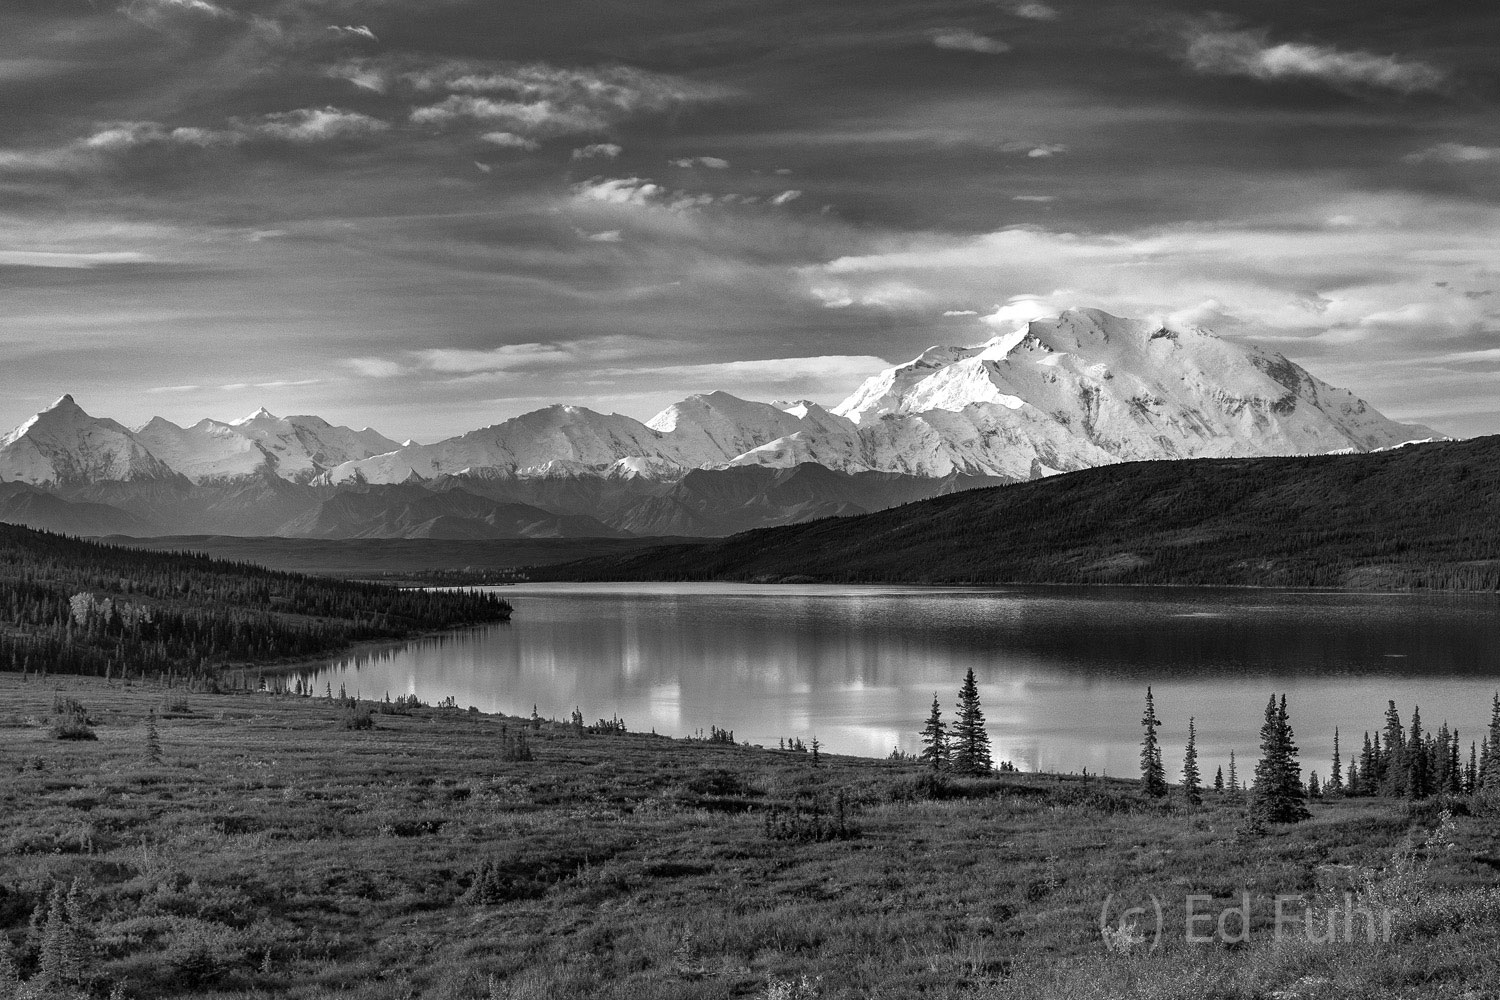 An ode to Ansel Adams who photographed this scene of Wonder Lake and Mount Denali in 1947 and marveled then that "Alaska is one...